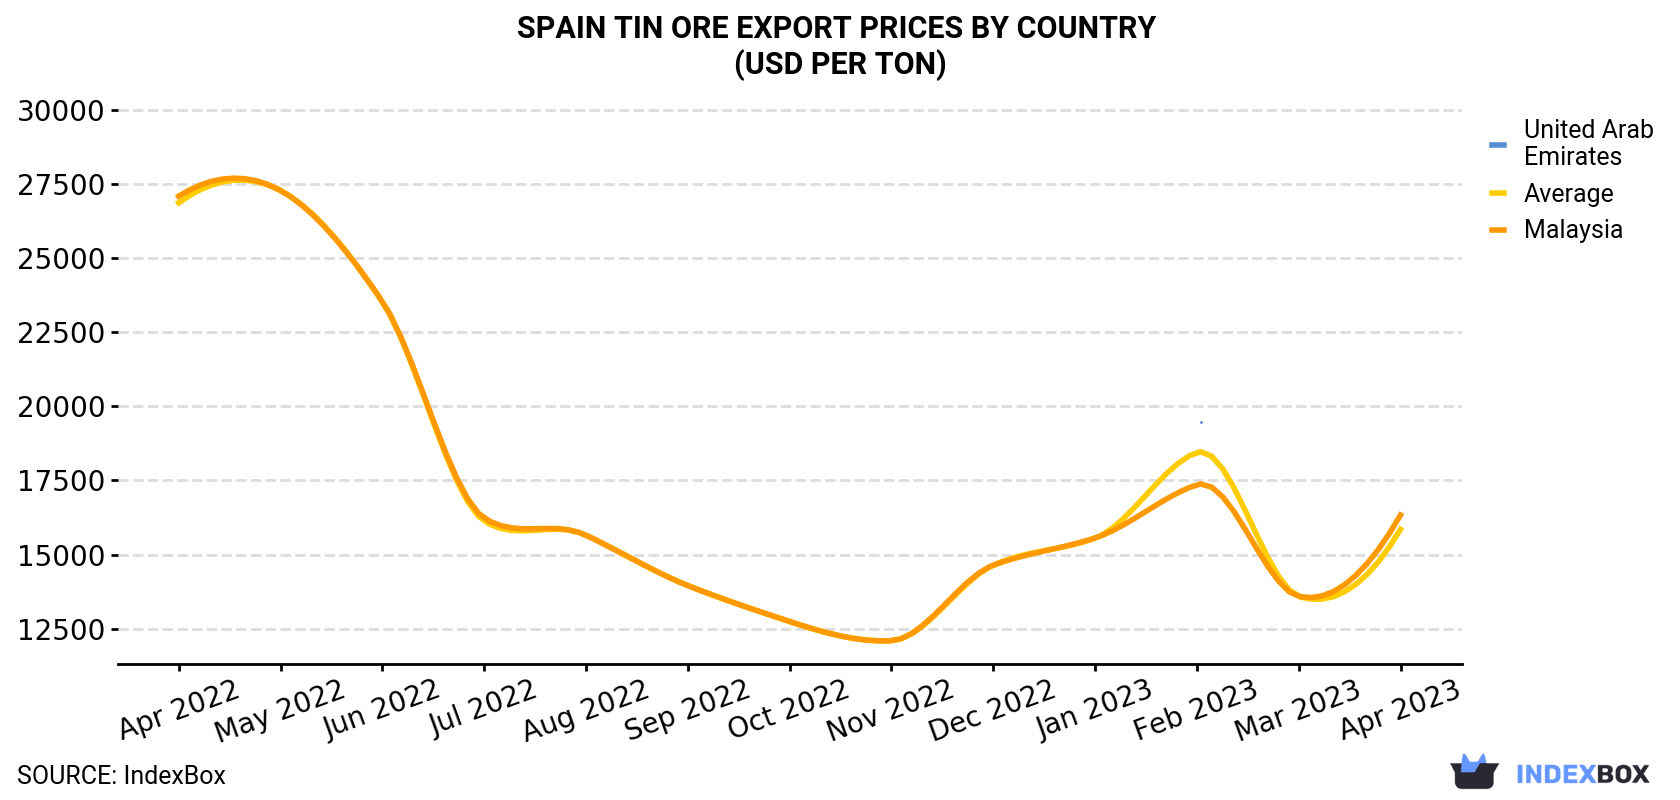 Spain Tin Ore Export Prices By Country (USD Per Ton)